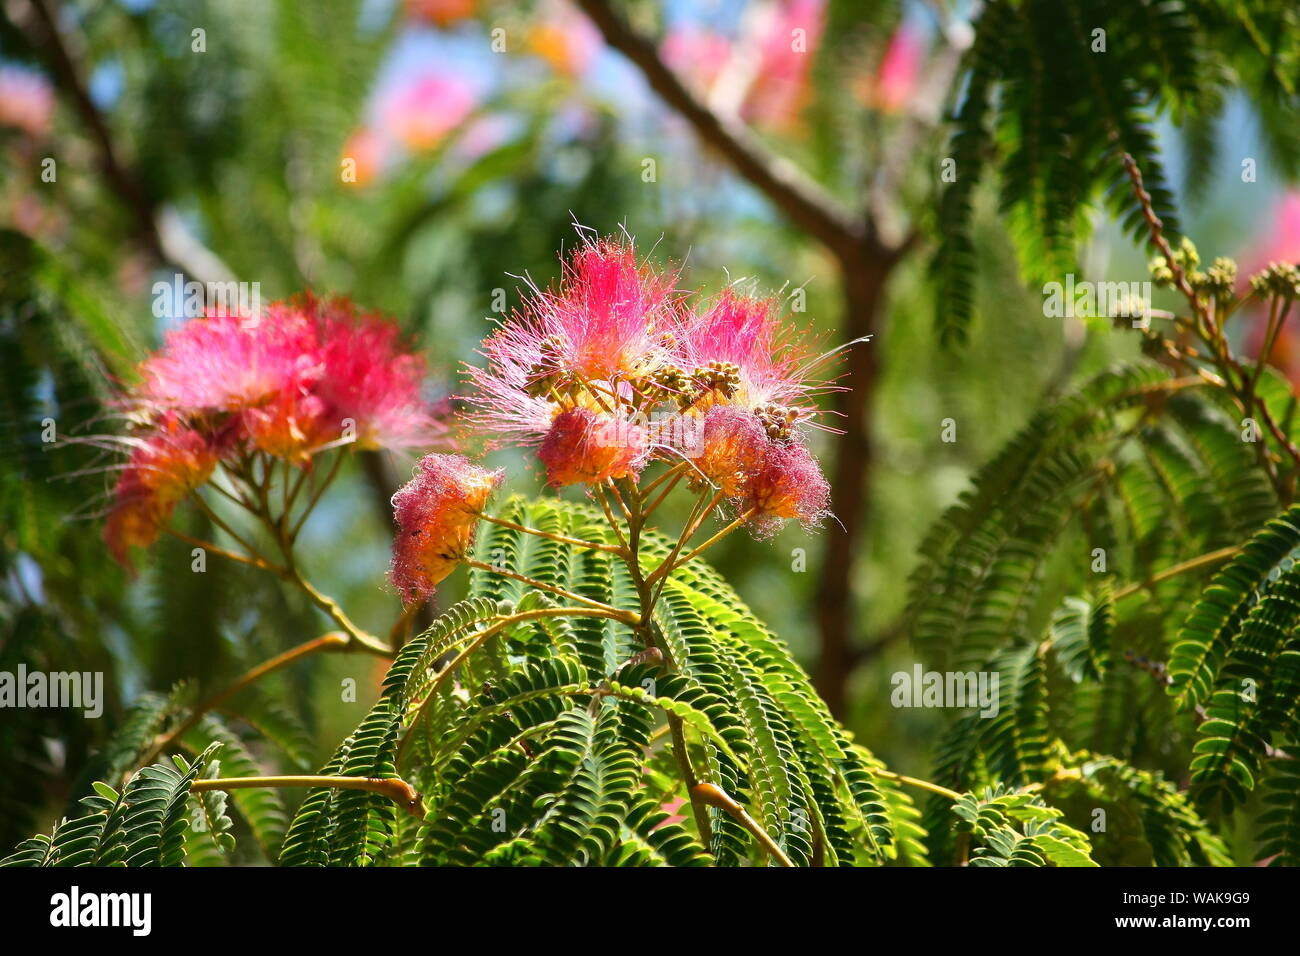 Clavellina tree flowers close-up at the end of spring in Talavera de la Reina, Spain Stock Photo